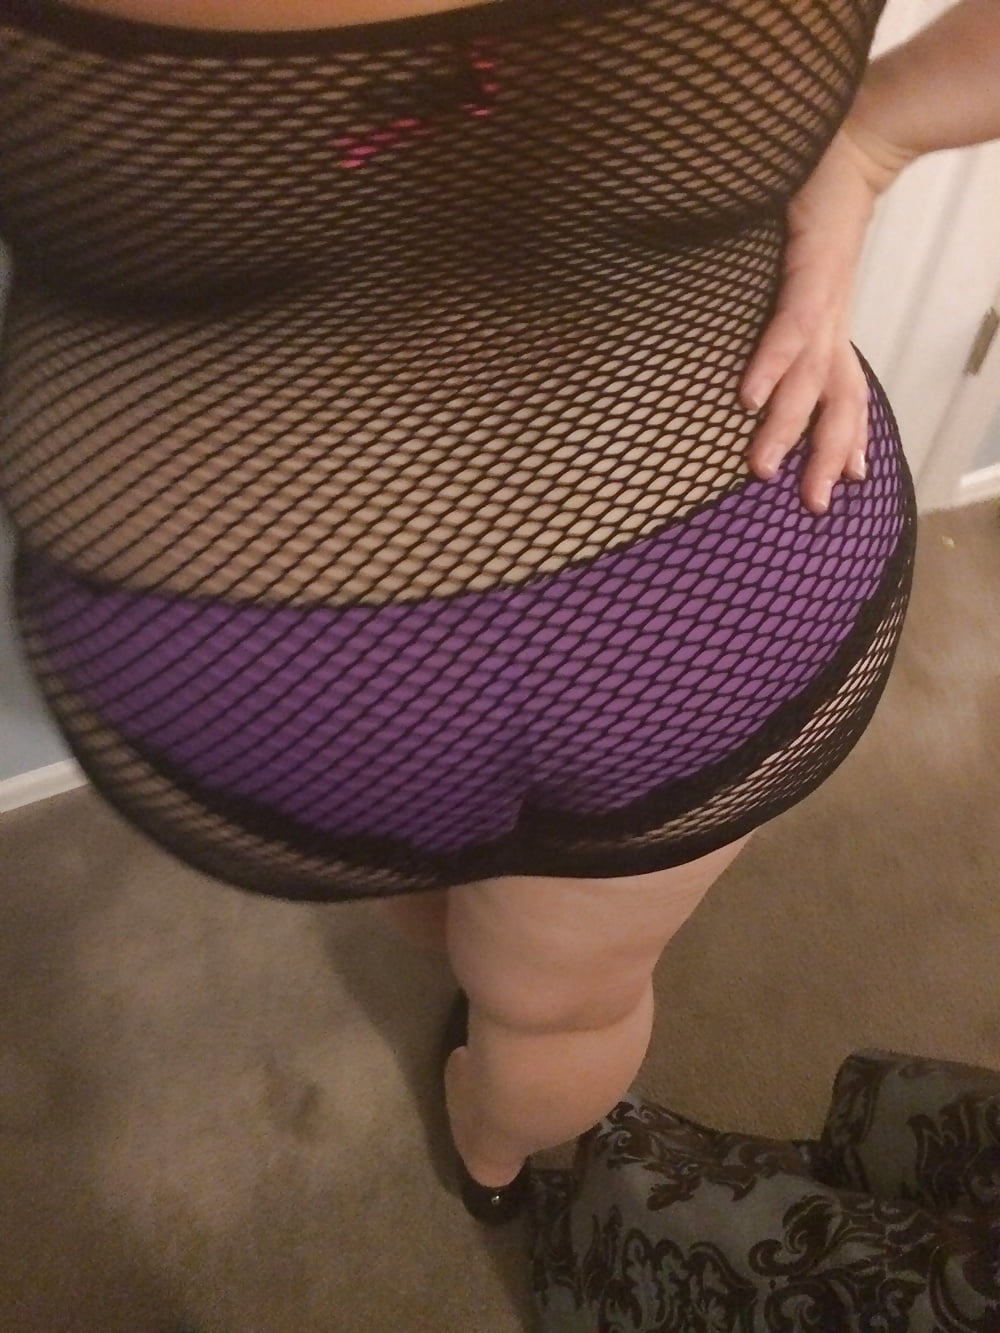 Thick ass PAWG Wife sexy outfit and heels porn pictures